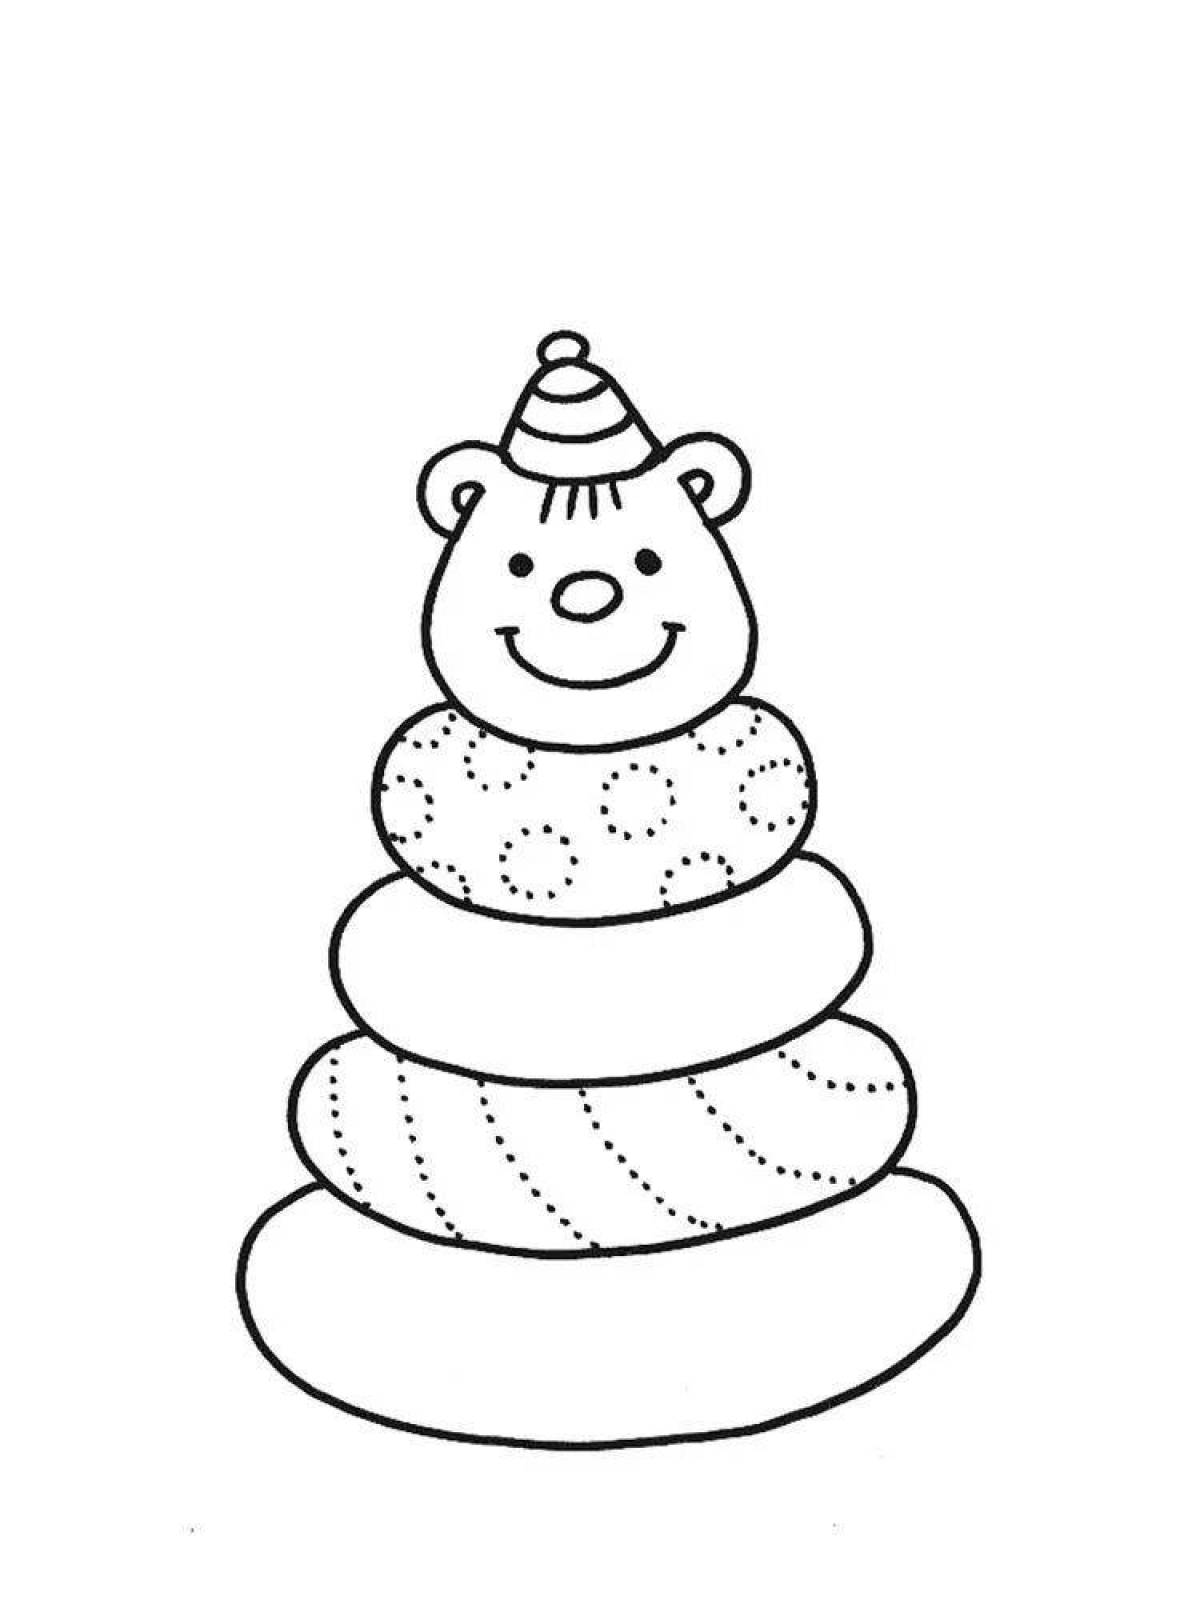 Bright pyramid coloring page picture for kids